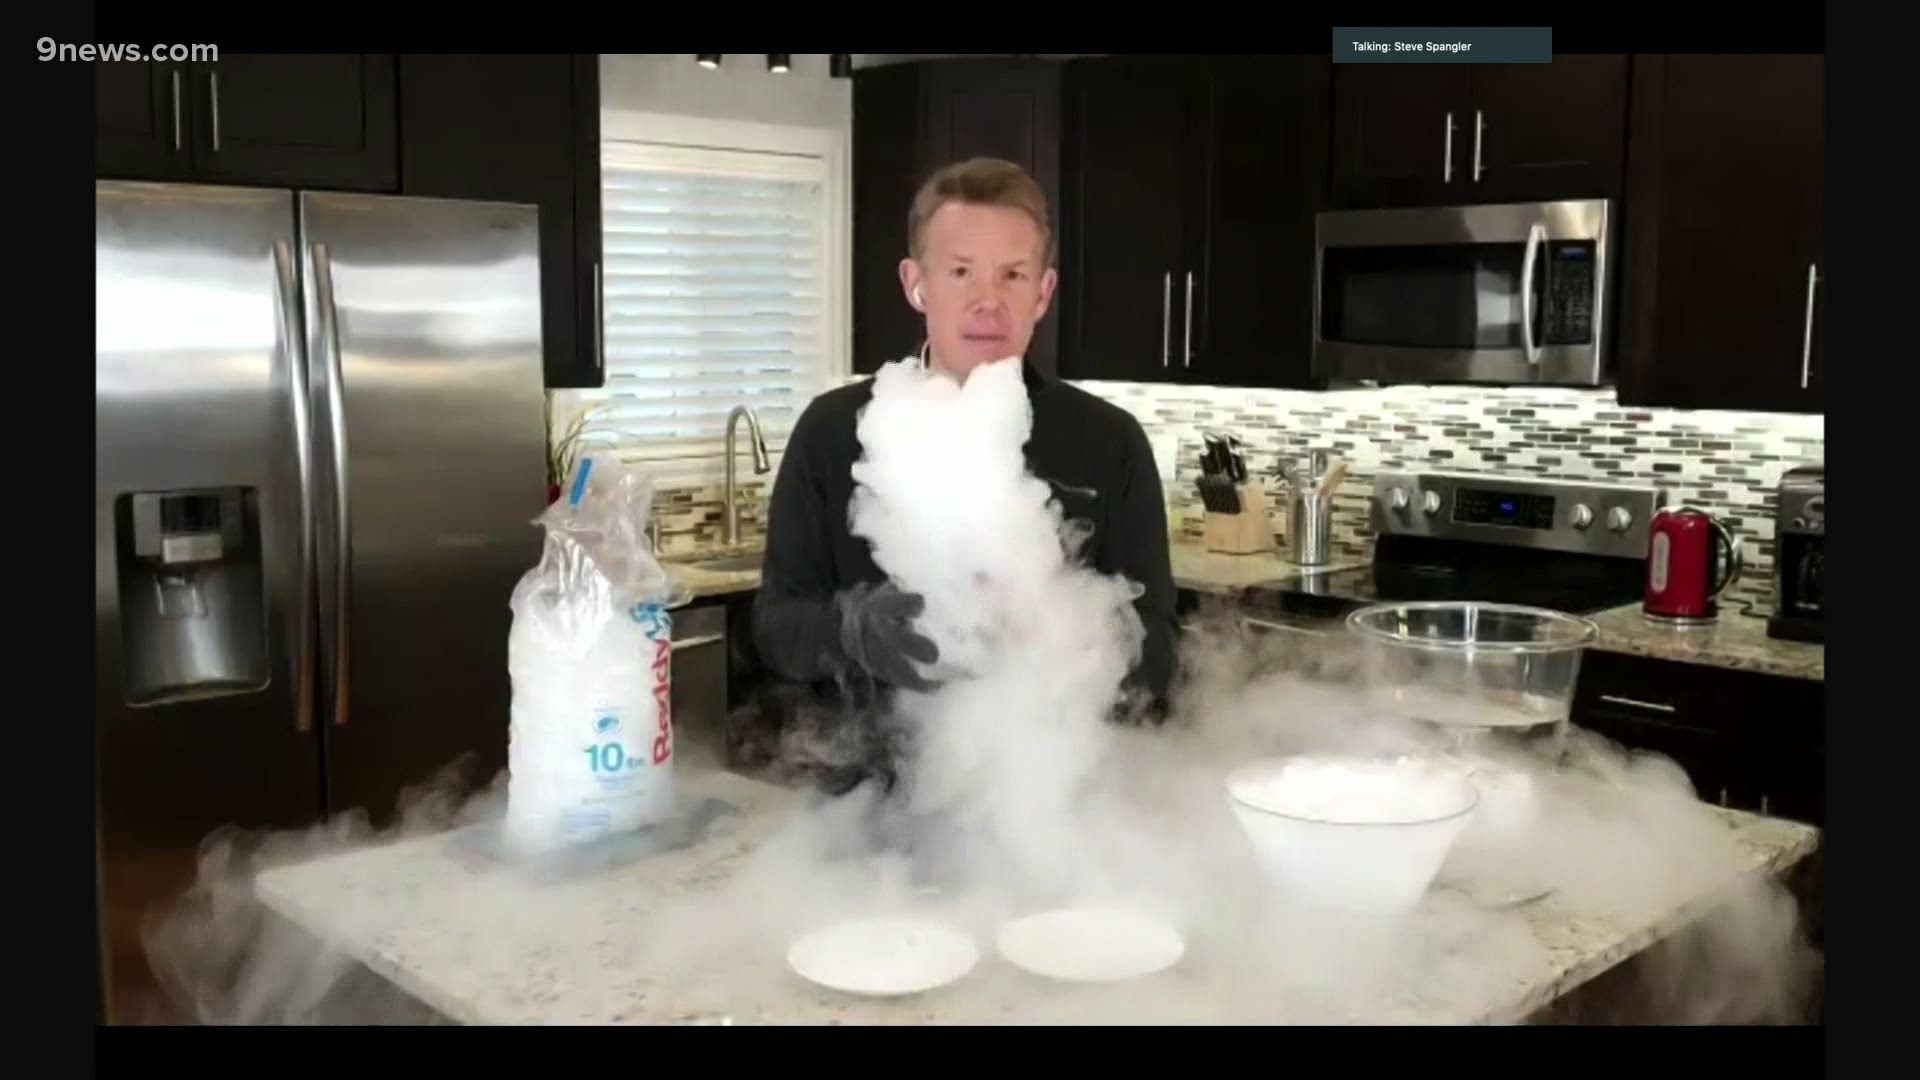 Science guy Steve Spangler shows us how dry ice gets to such cold temperatures.